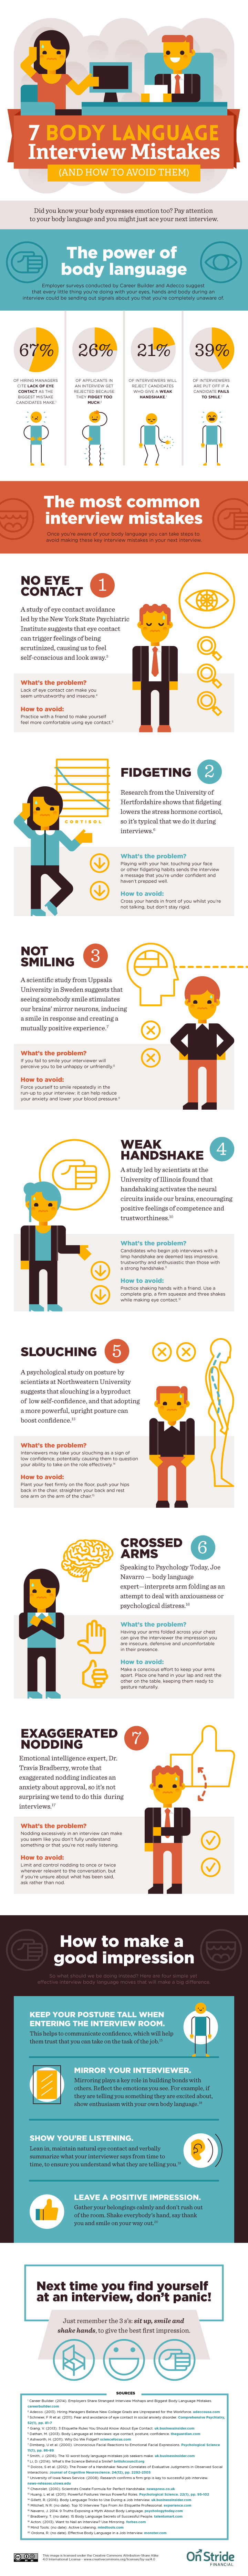 7 Body Language Interview Mistakes and How to Avoid Them Infographic